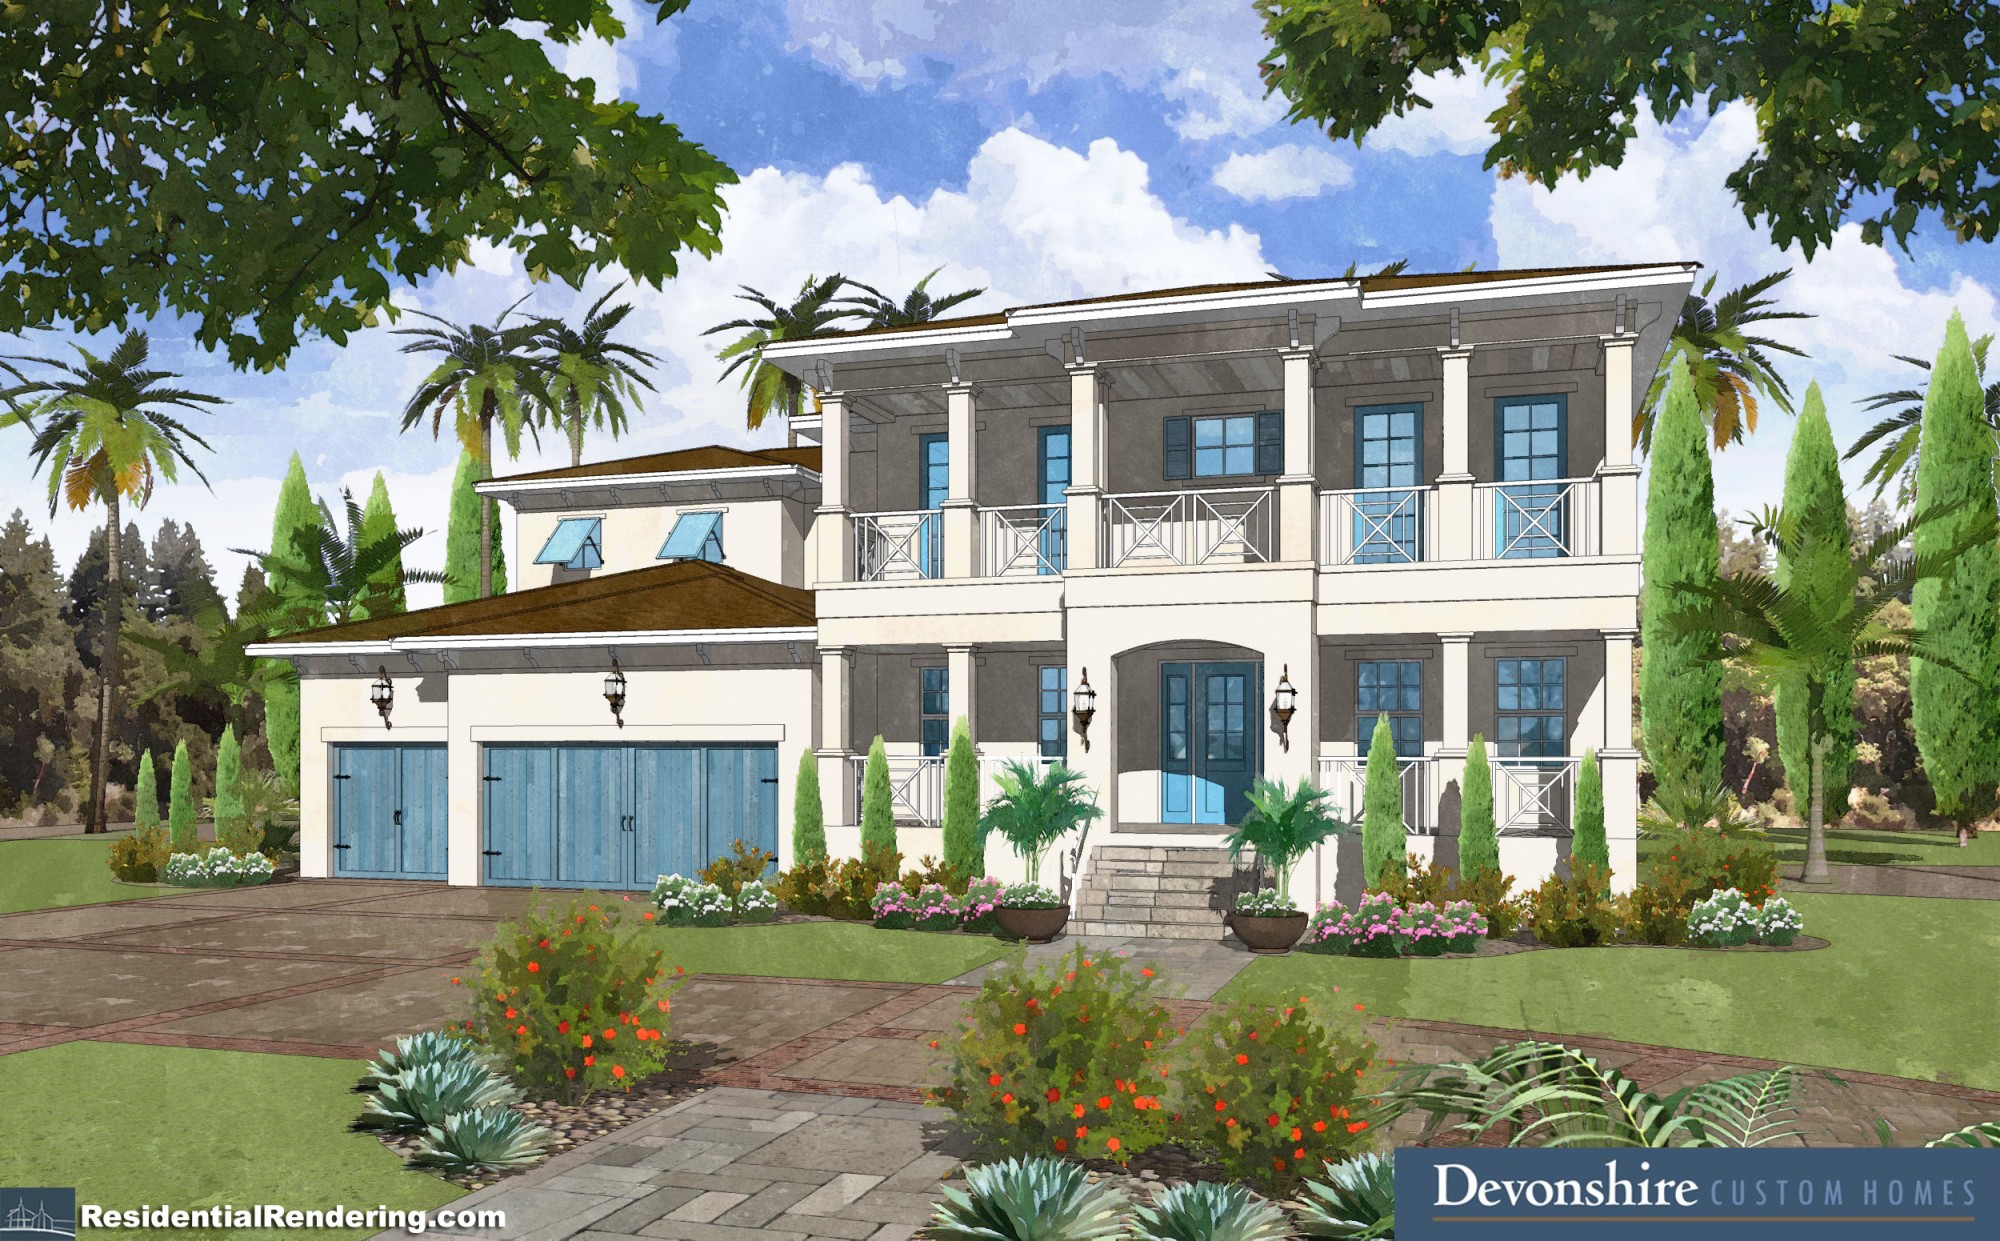 Own Custom Home - A rendering of a custom home with a front porch and a garage.